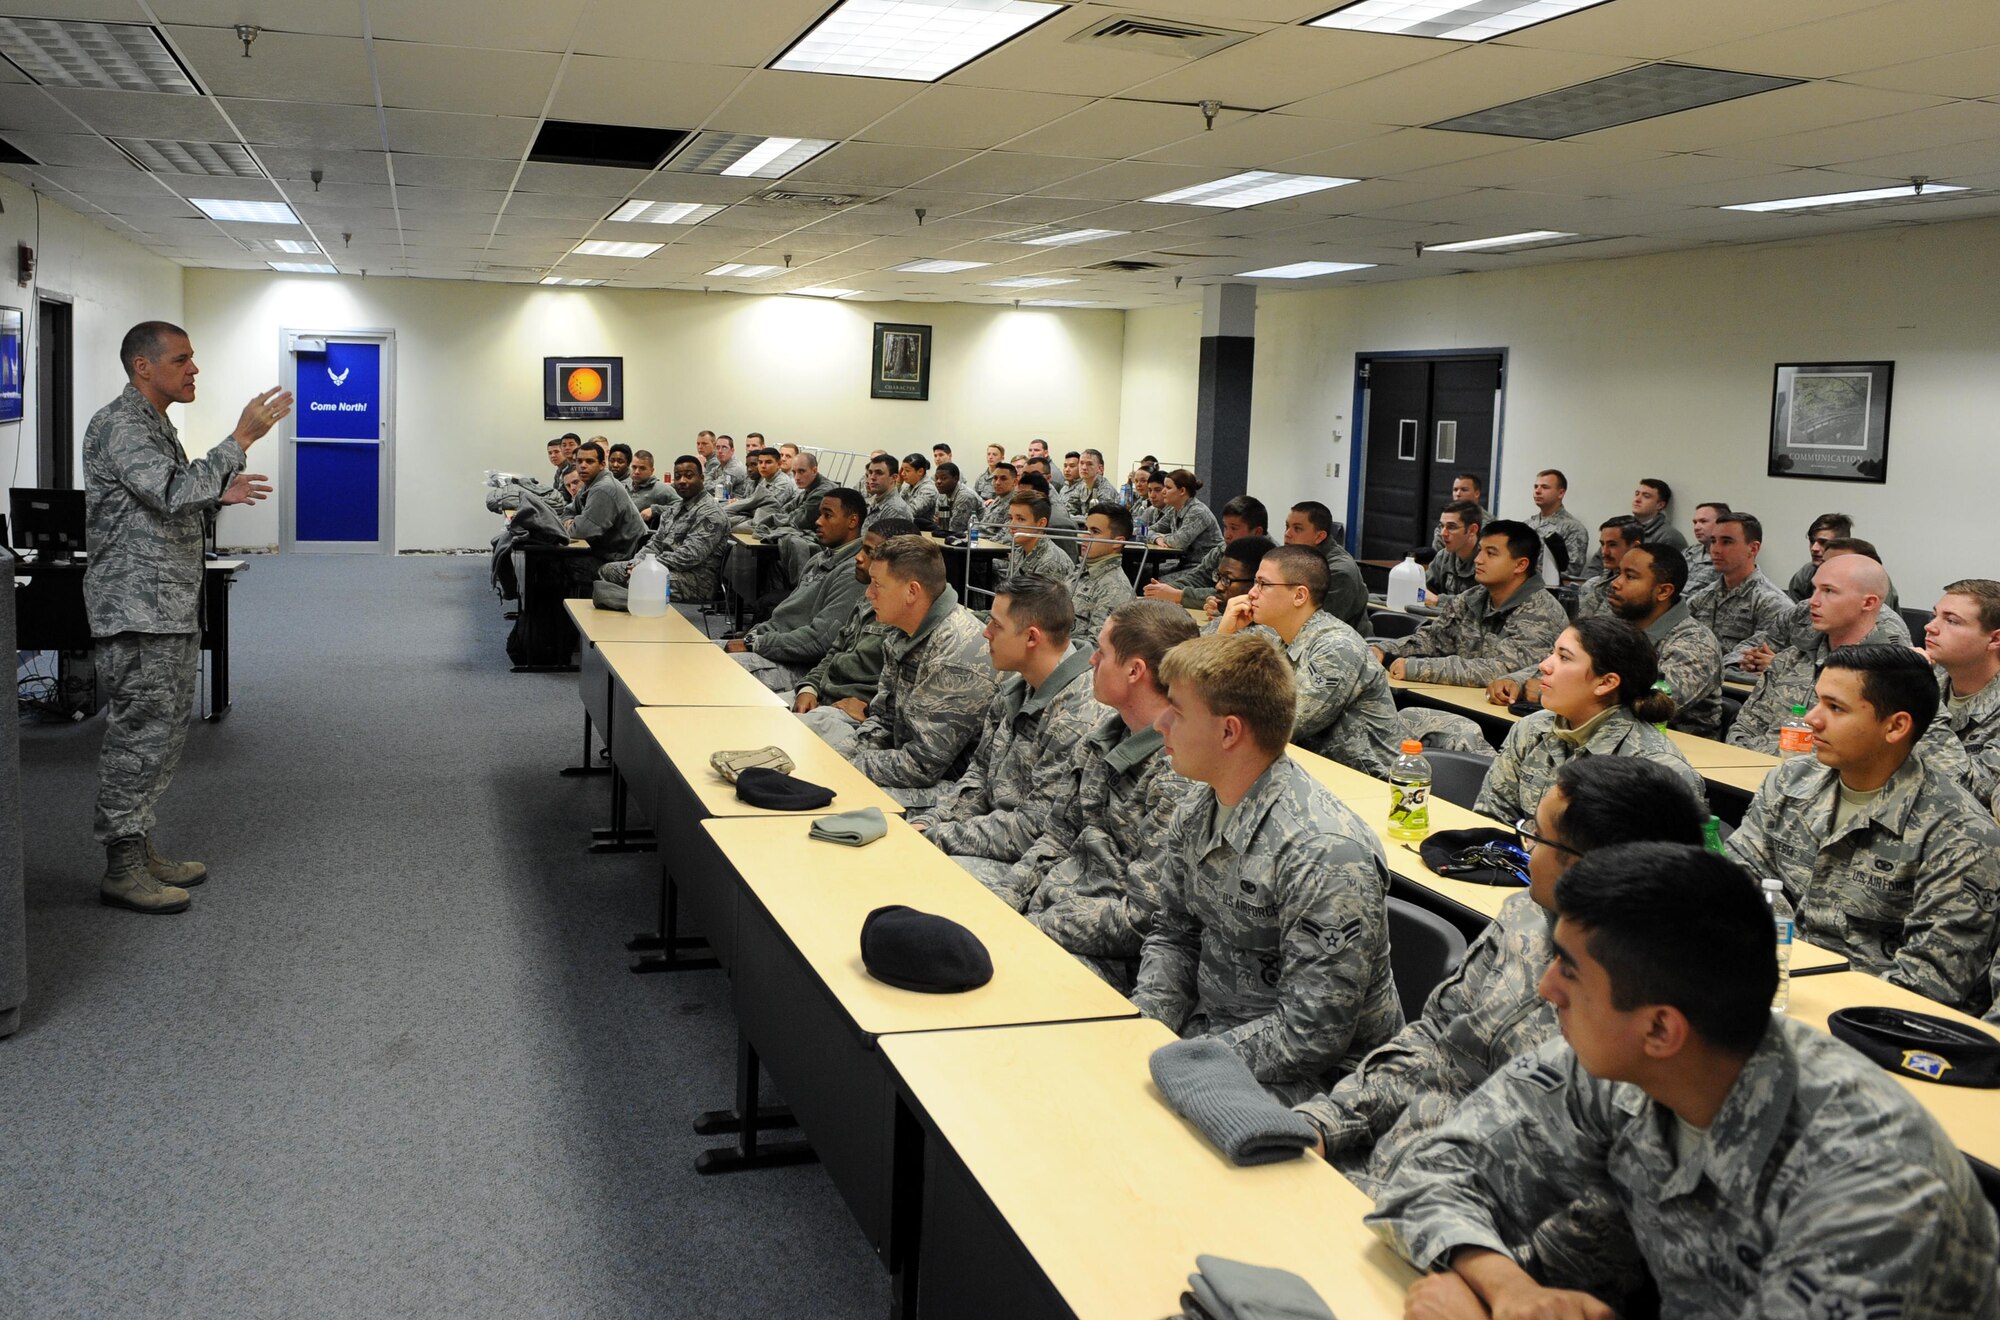 U.S. Air Force Maj. Gen. Thomas A. Bussiere, 8th Air Force commander, visits with security forces members from across Air Force Global Strike Command at Minot Air Force Base, N.D., Oct. 30, 2016, during exercise Global Thunder 17. Global Thunder is an annual training event that assesses command and control functionality in all USSTRATCOM mission areas and affords component commands a venue to evaluate their joint operational readiness. (U.S Air Force photo by Senior Airman Kristoffer Kaubisch)